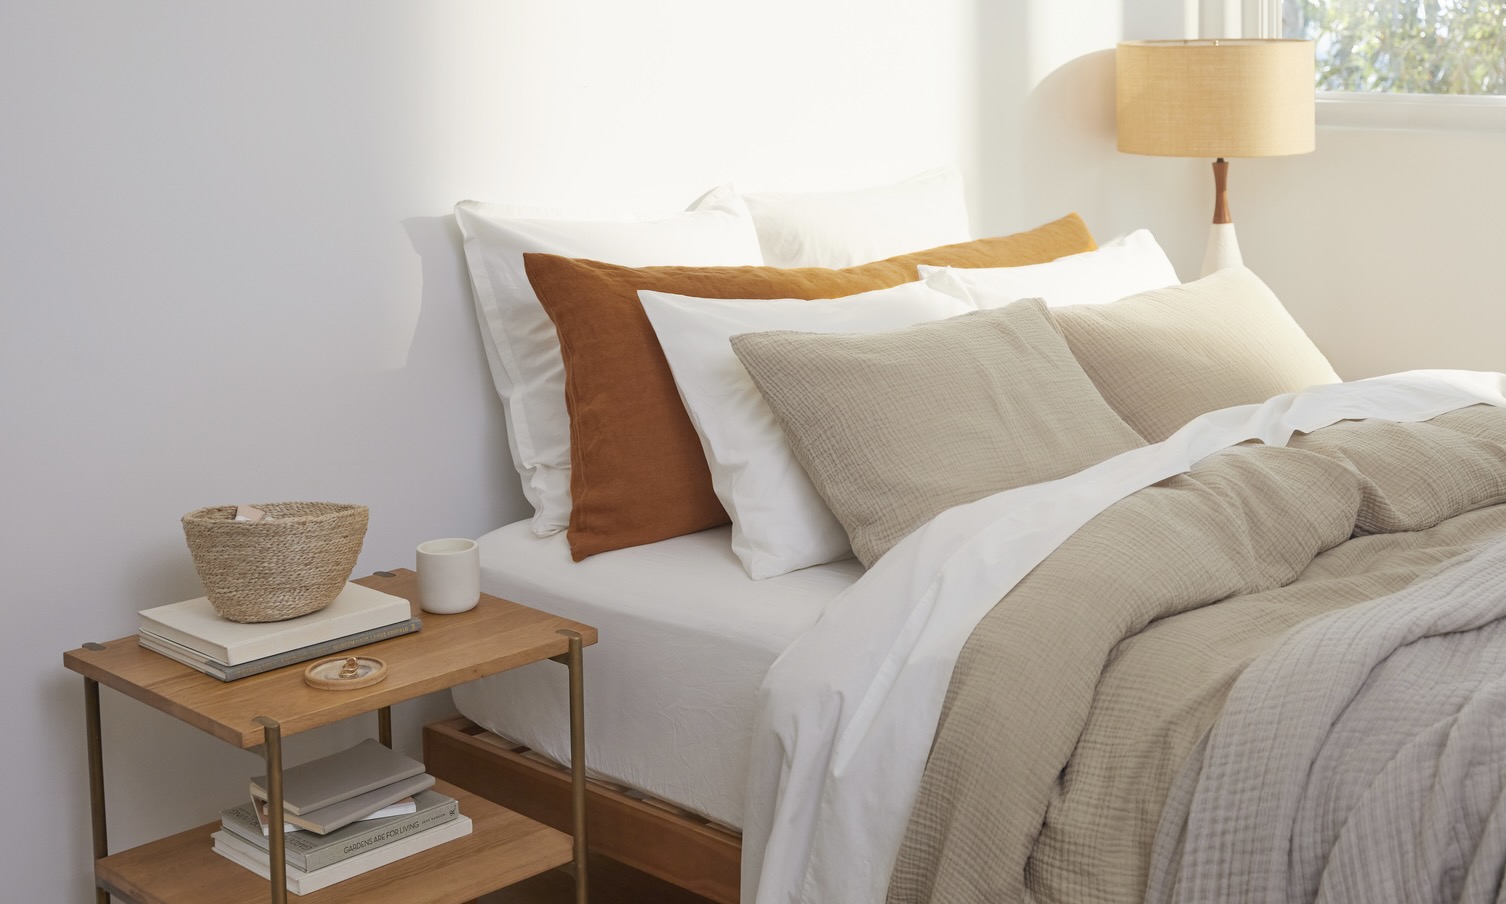 10 Ways to Organize a Clutter-Free Small Bedroom